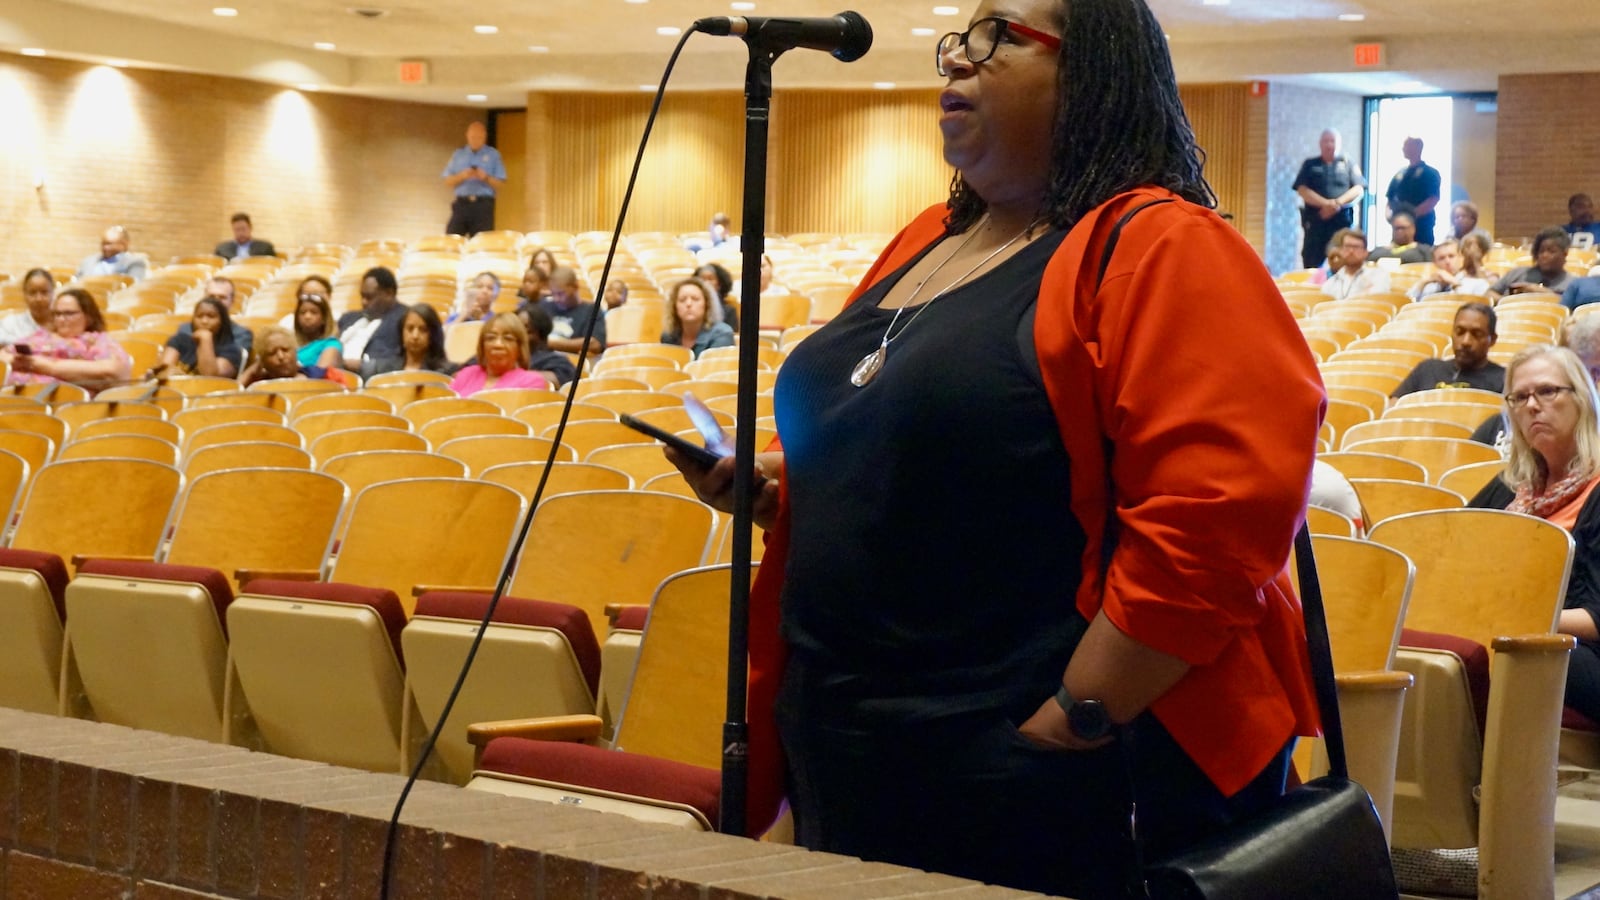 Andrea Price, an alumna of Arlington High School, was one of dozens who spoke at a meeting about converting the campus to a middle school.